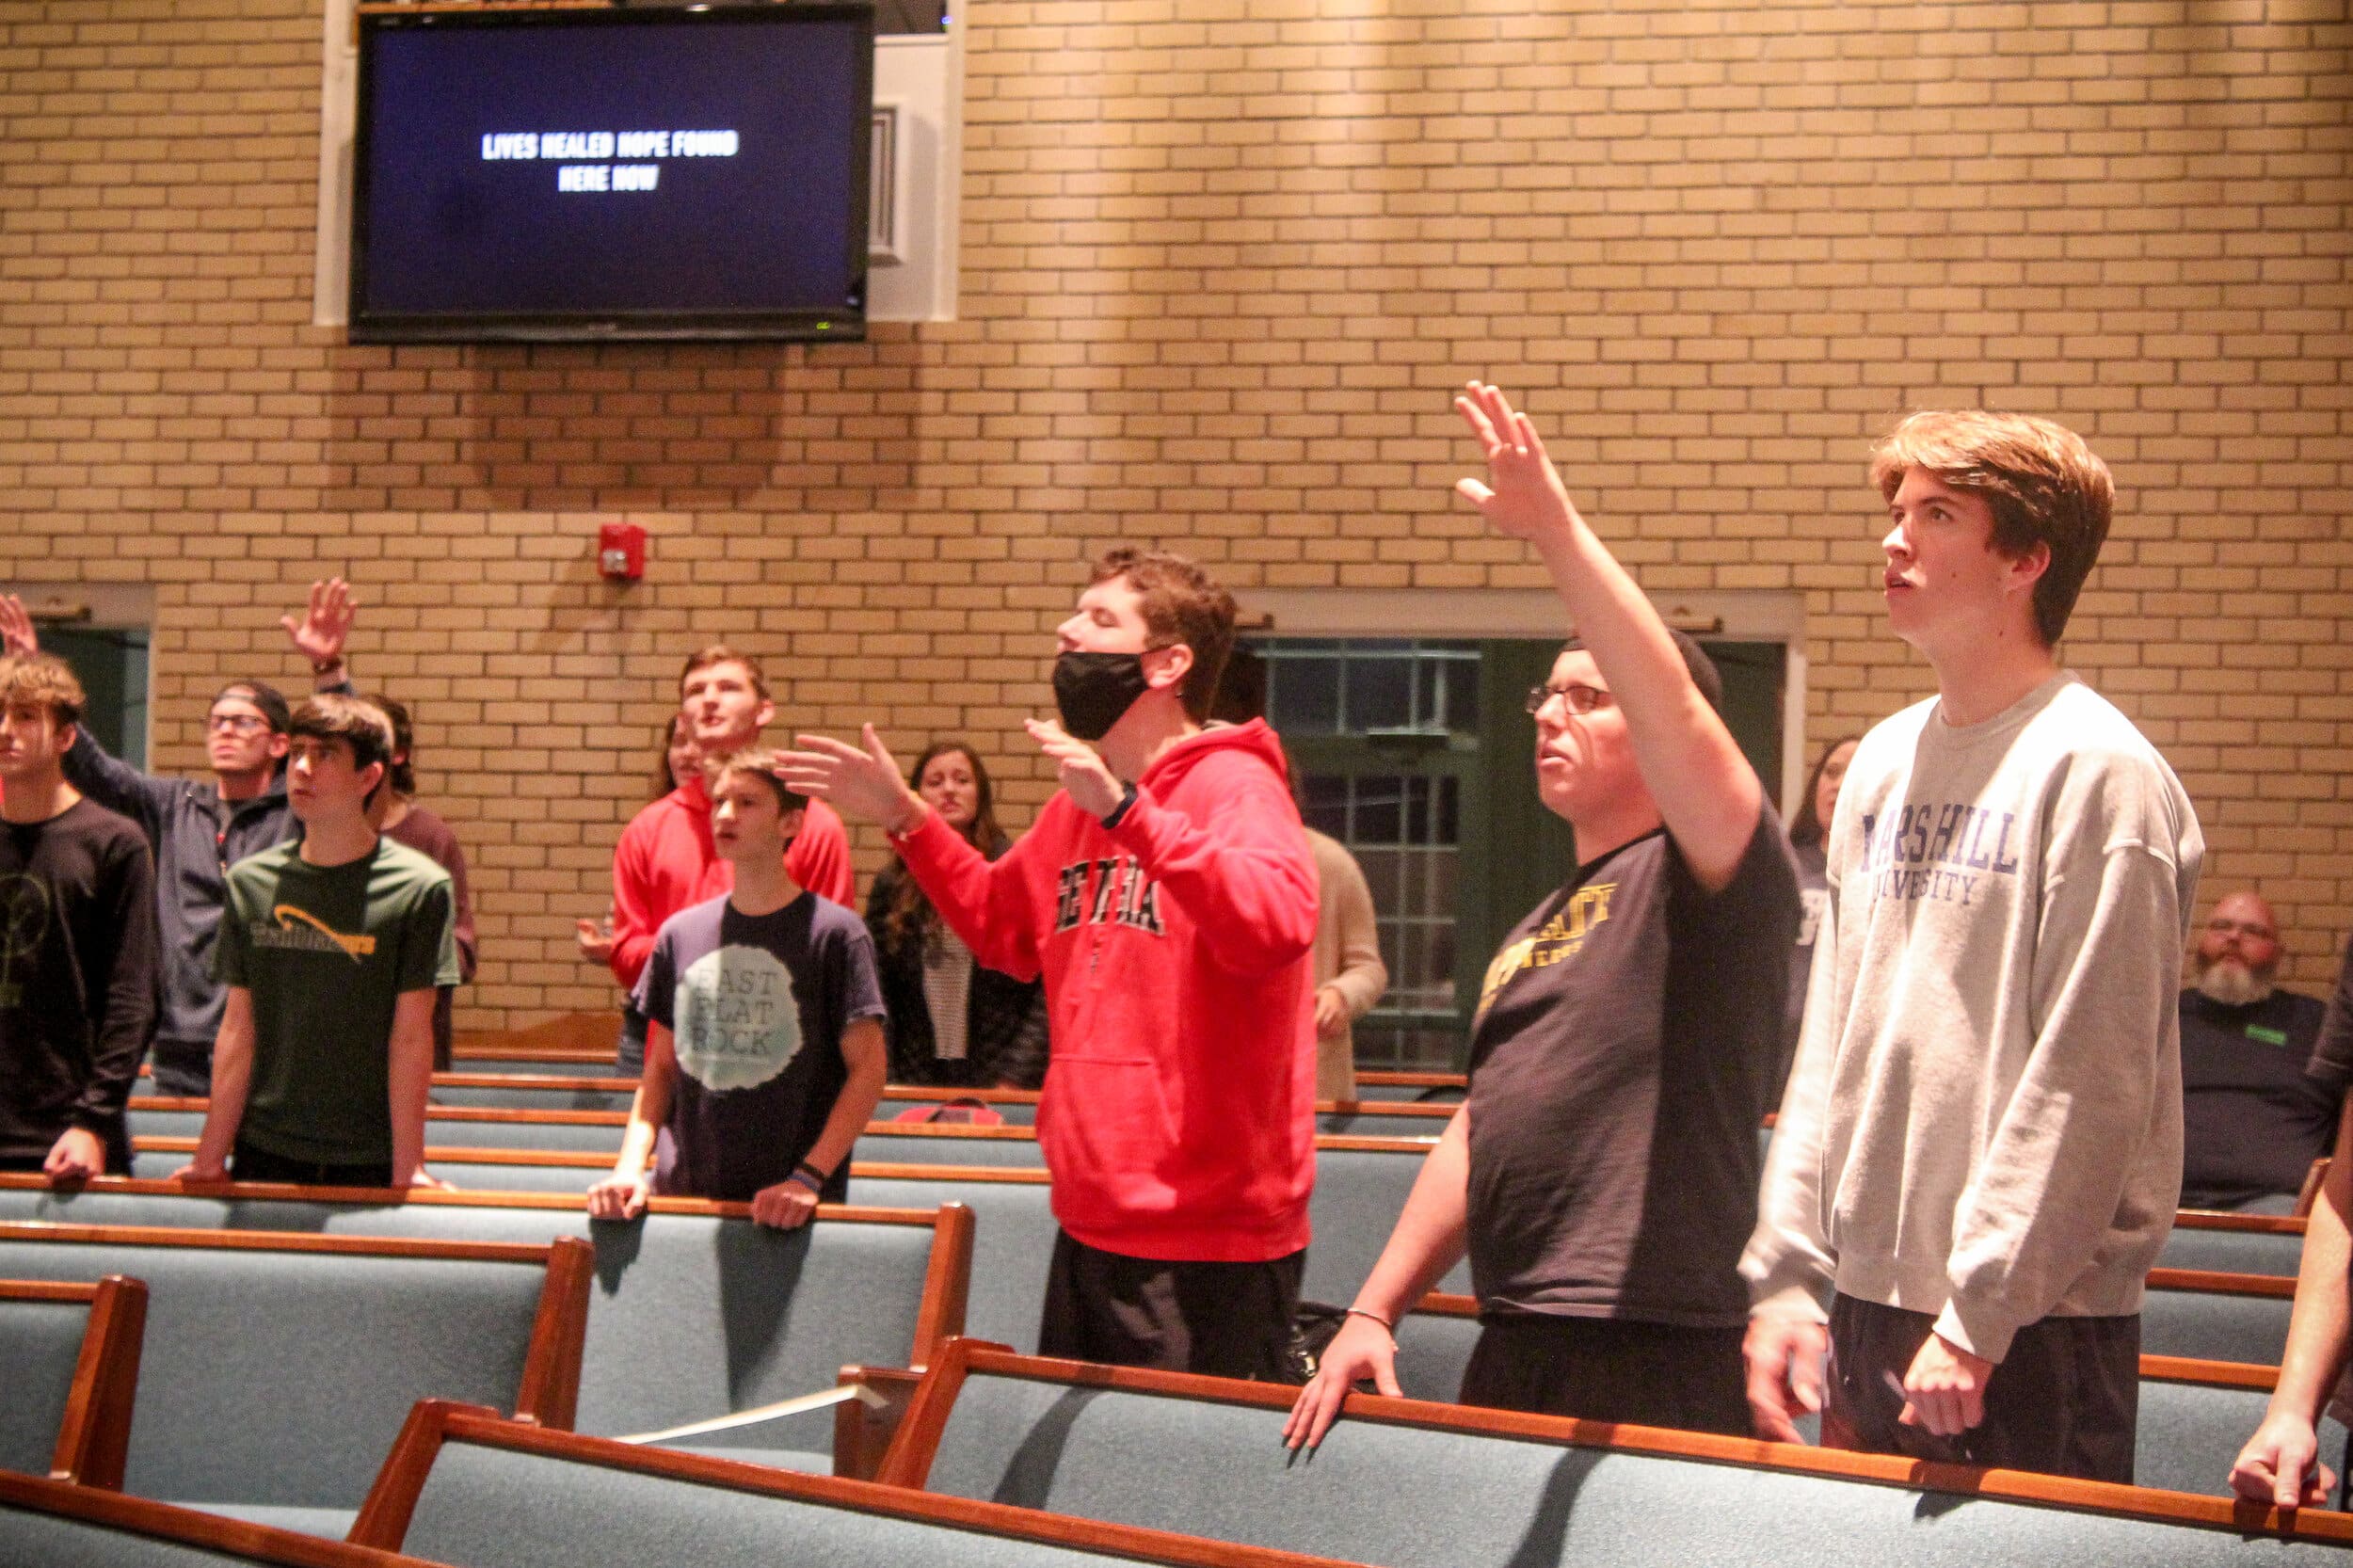 NGU students worship alongside youth group members. Social distancing policies were in place, even within such a large setting, but the gospel message was still received.